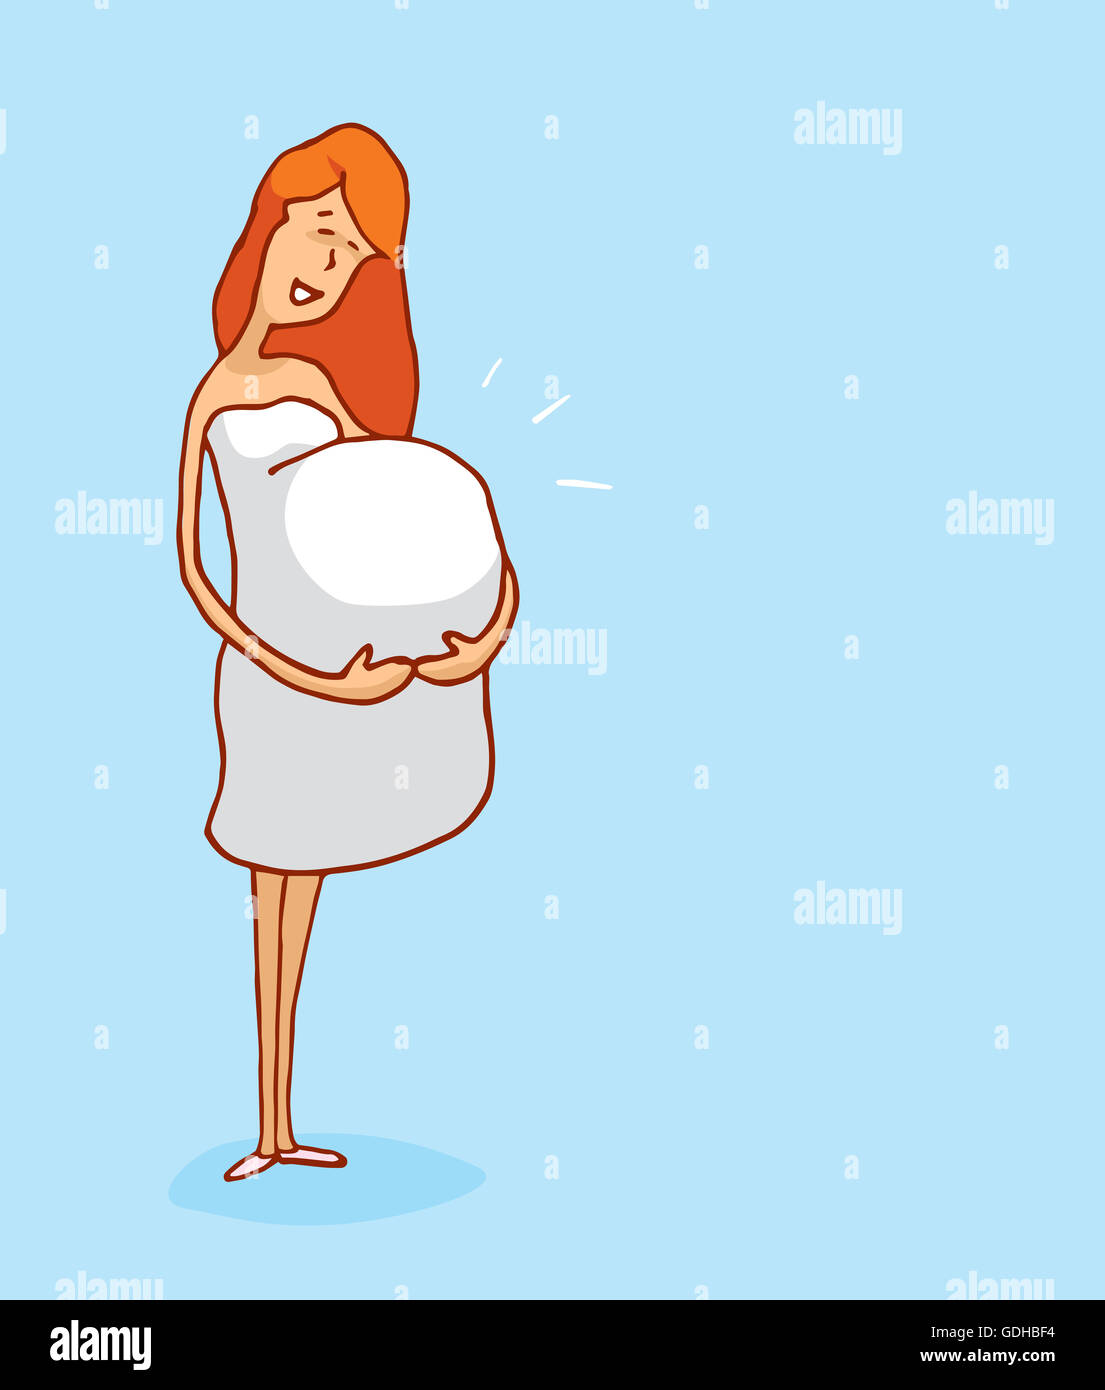 Cartoon illustration of pregnant woman or mother holding her belly Stock Photo